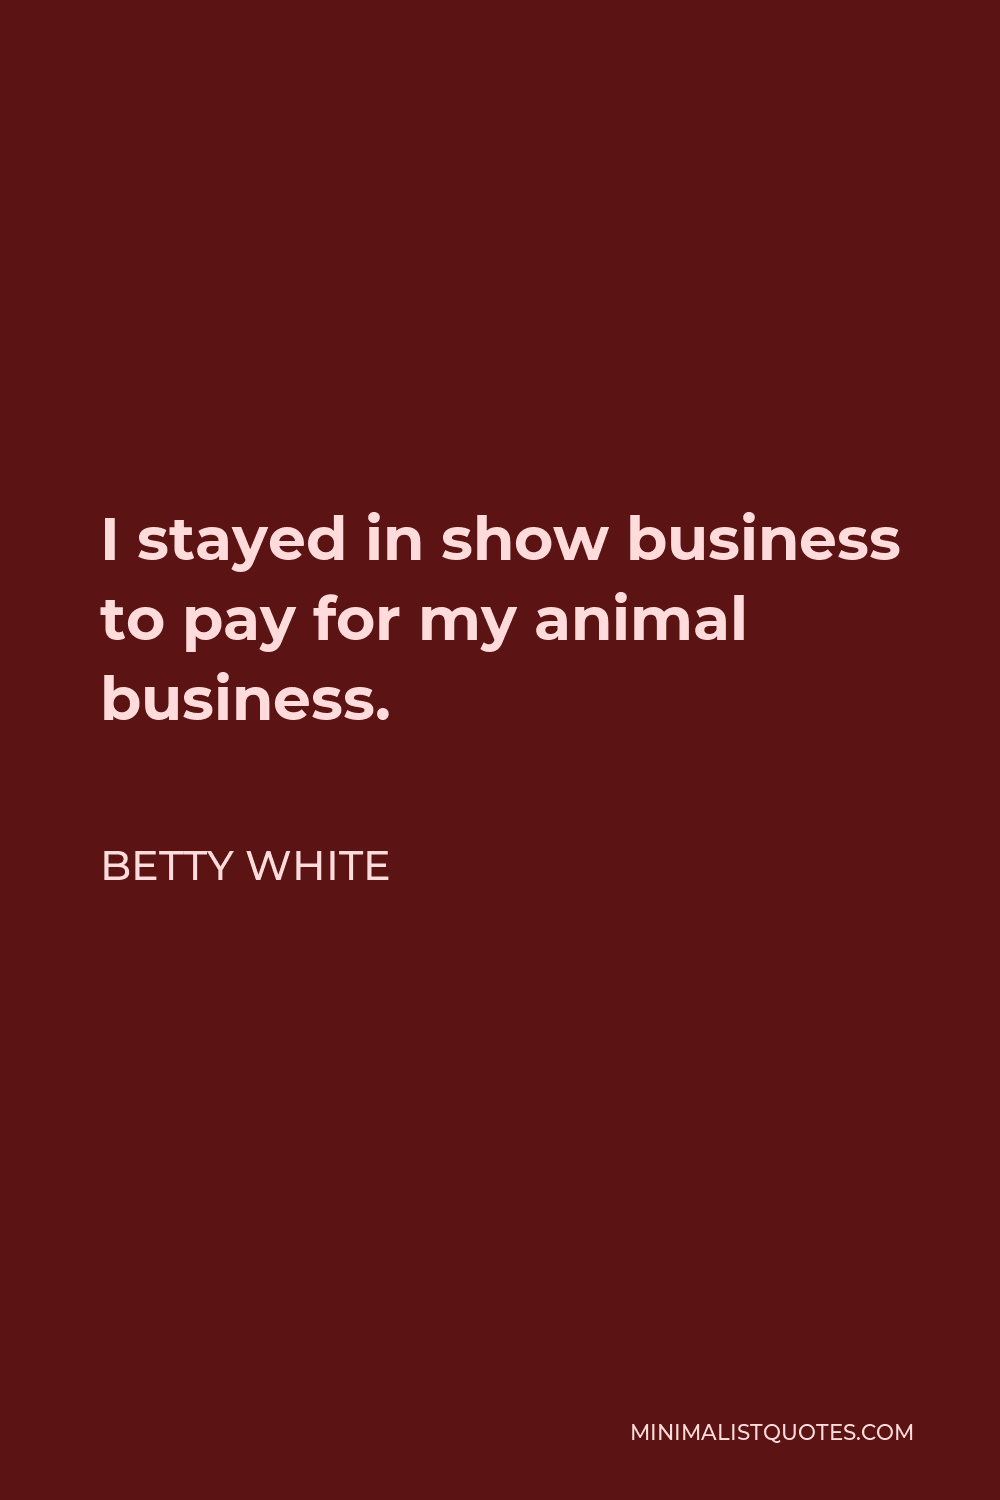 Betty White Quote - I stayed in show business to pay for my animal business.